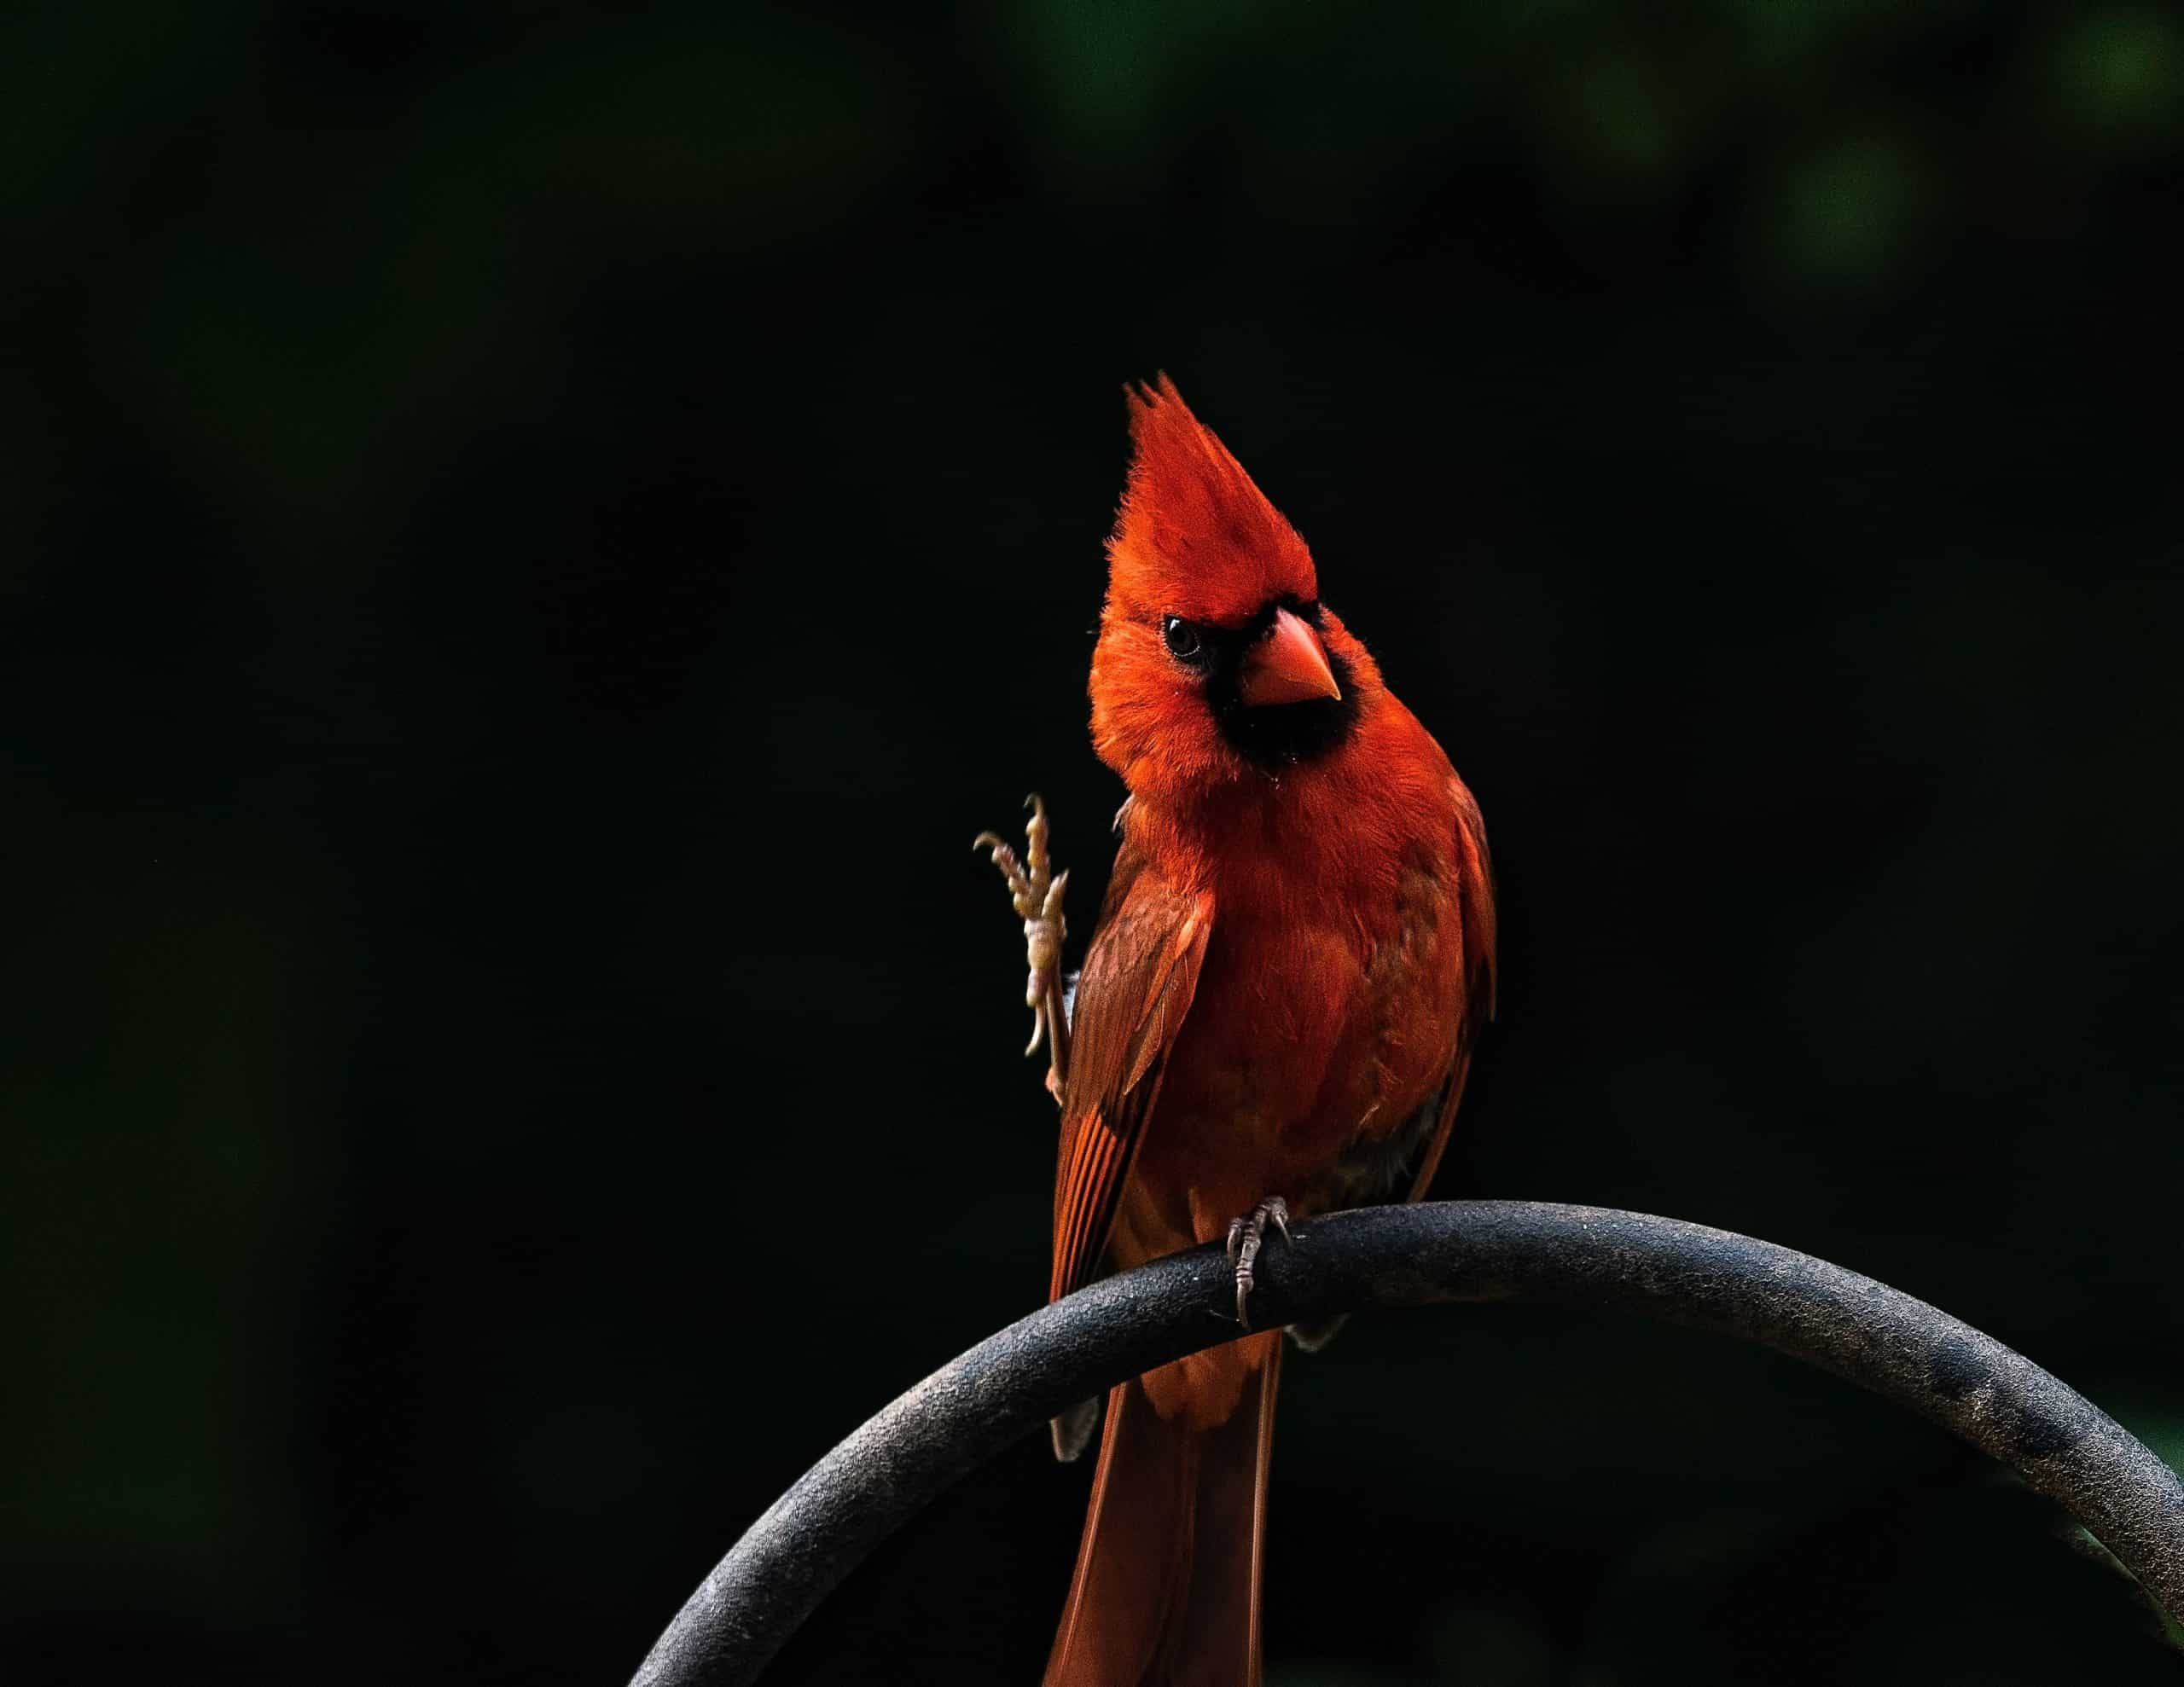 a northern cardinal perched on shepherd's hook